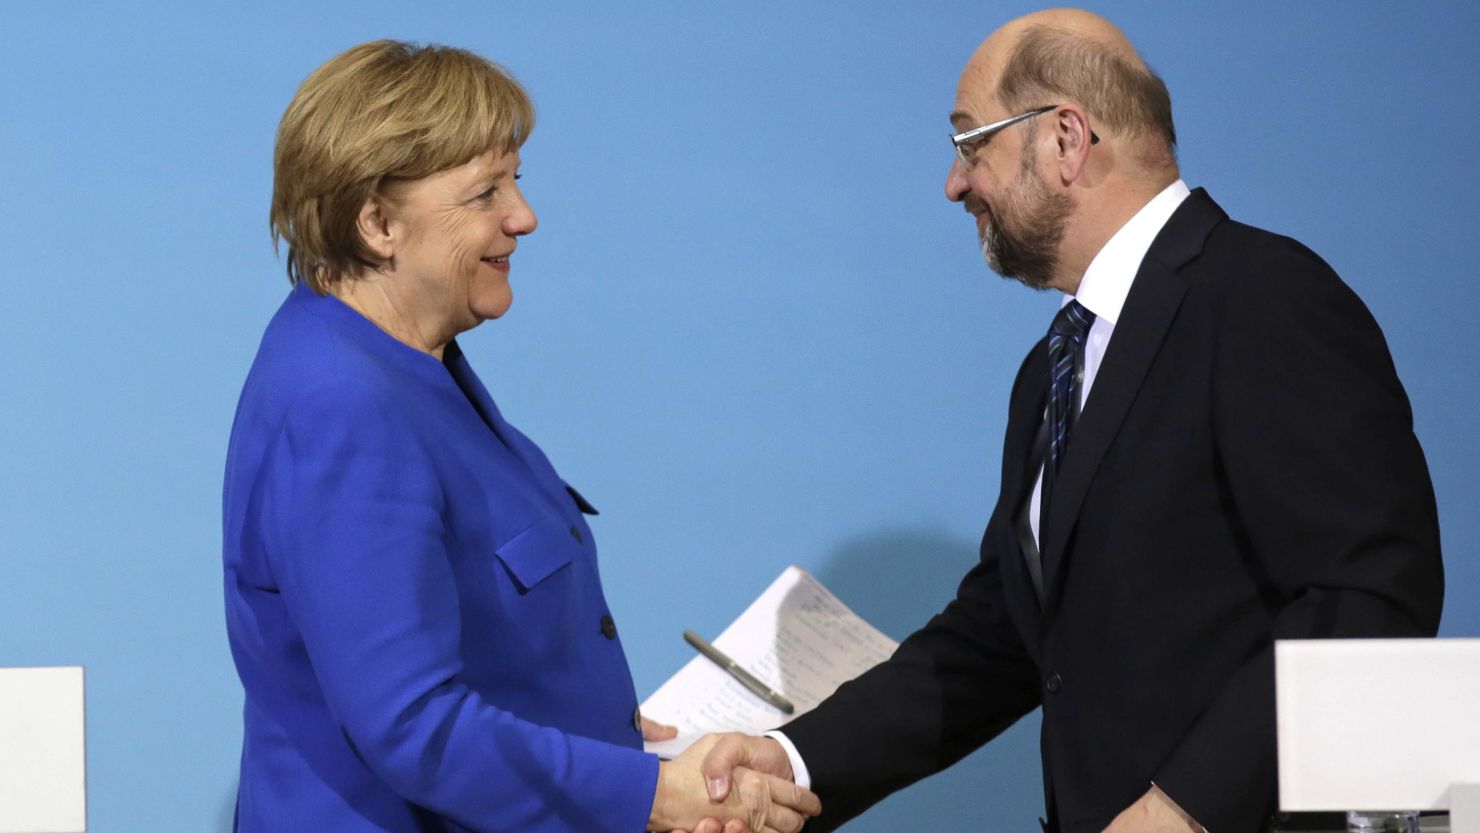 Merkel (L) shakes hands with Martin Schulz during a joint statement after talks on Friday.